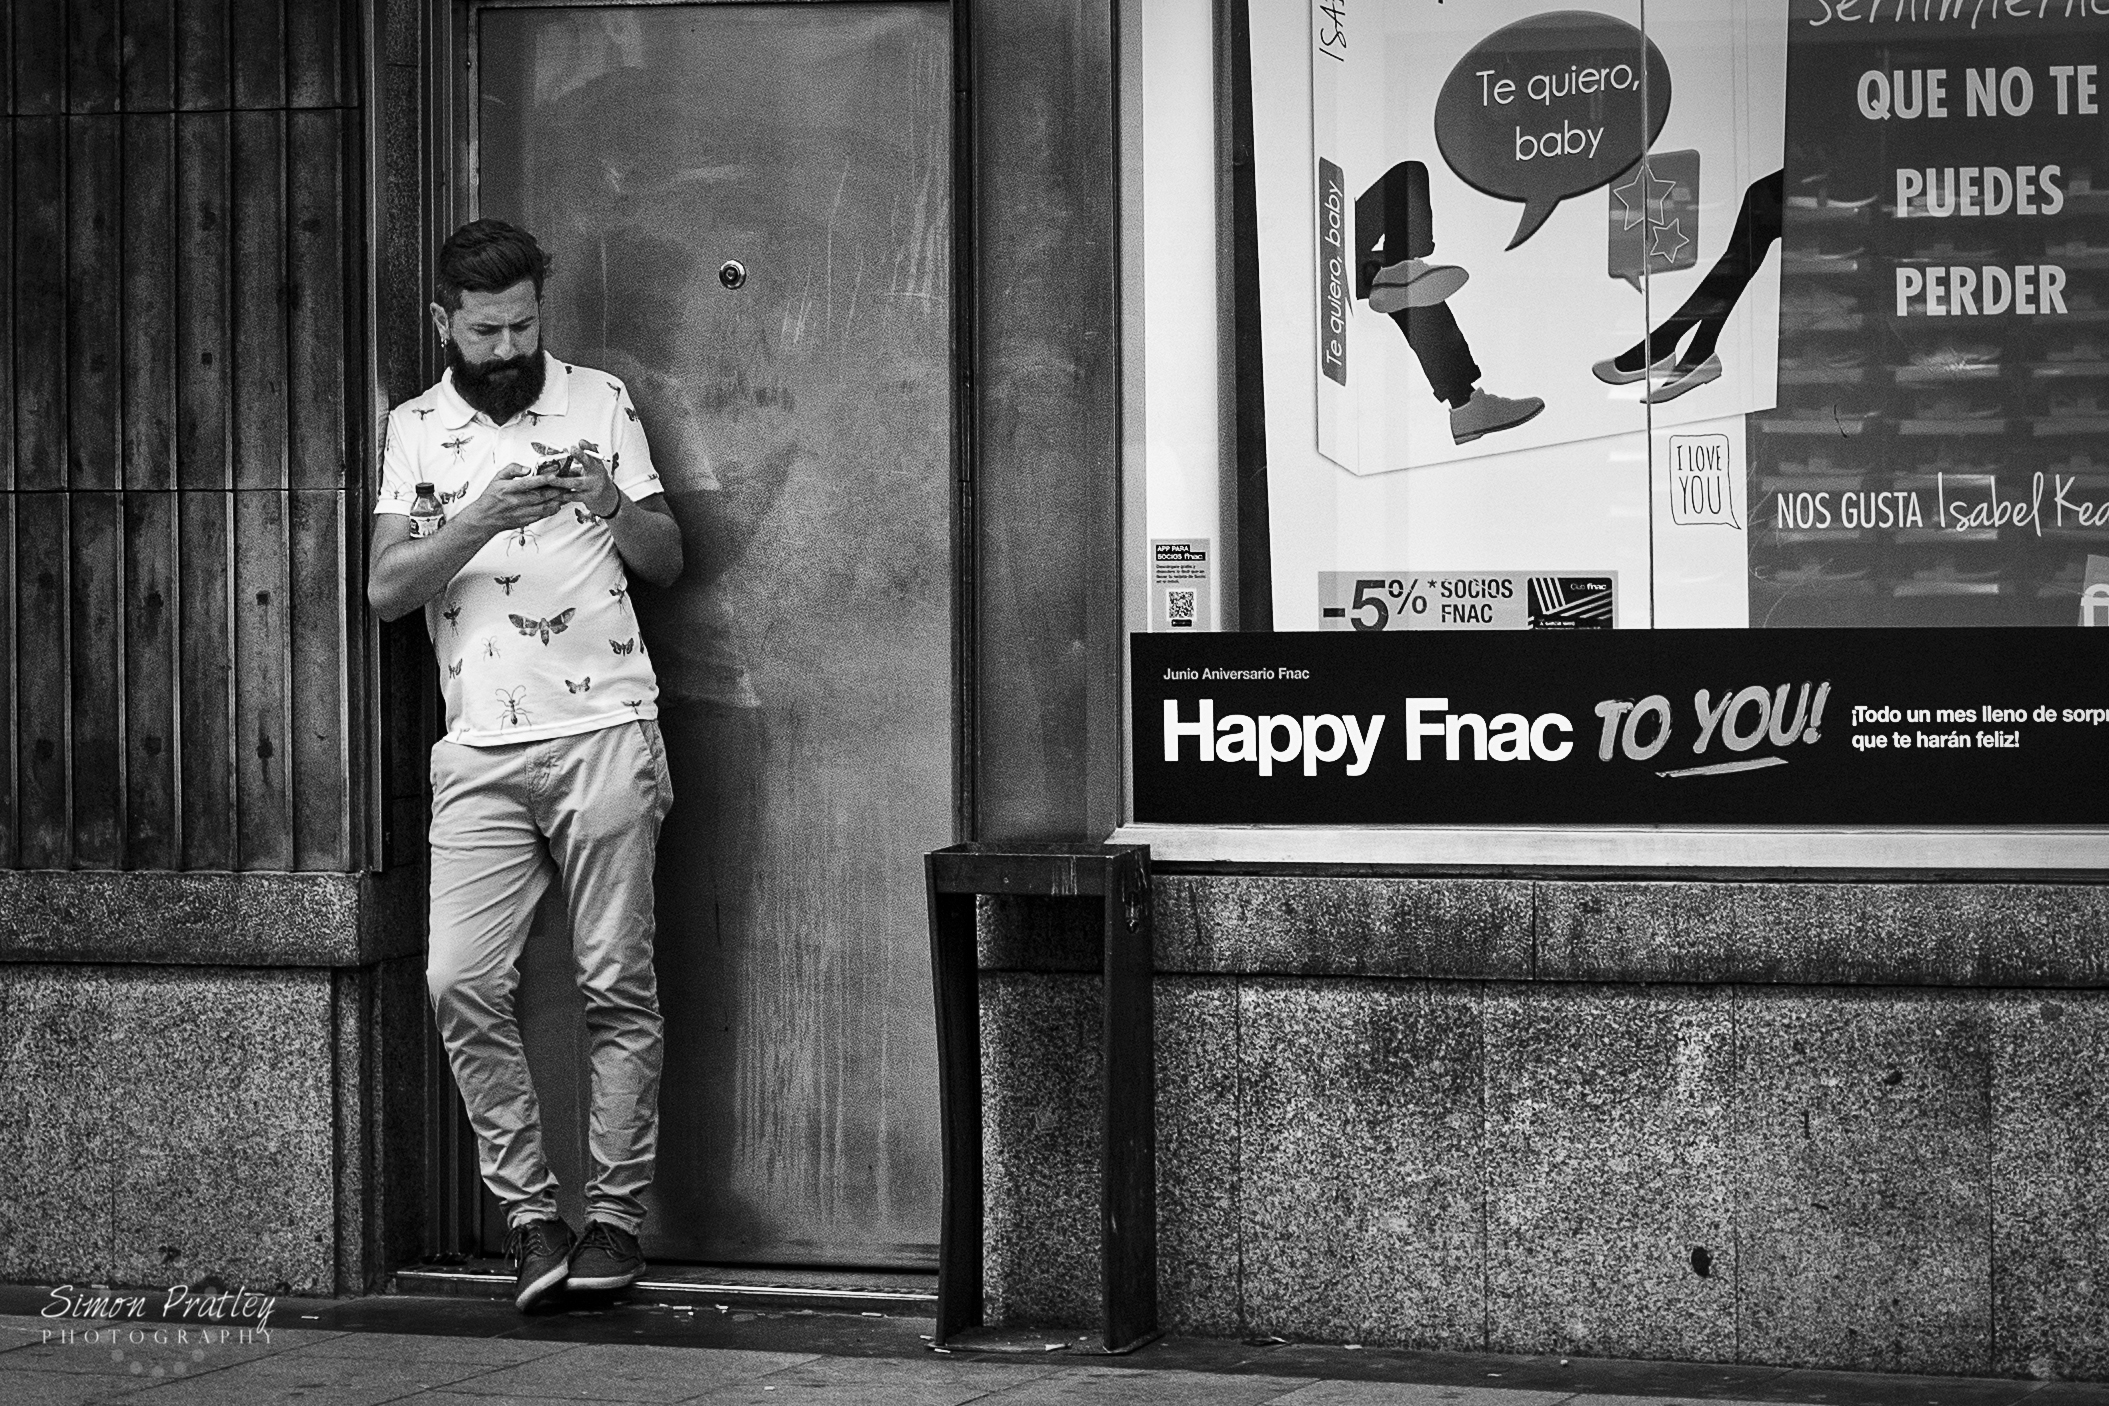 Even Hipsters Need To Text